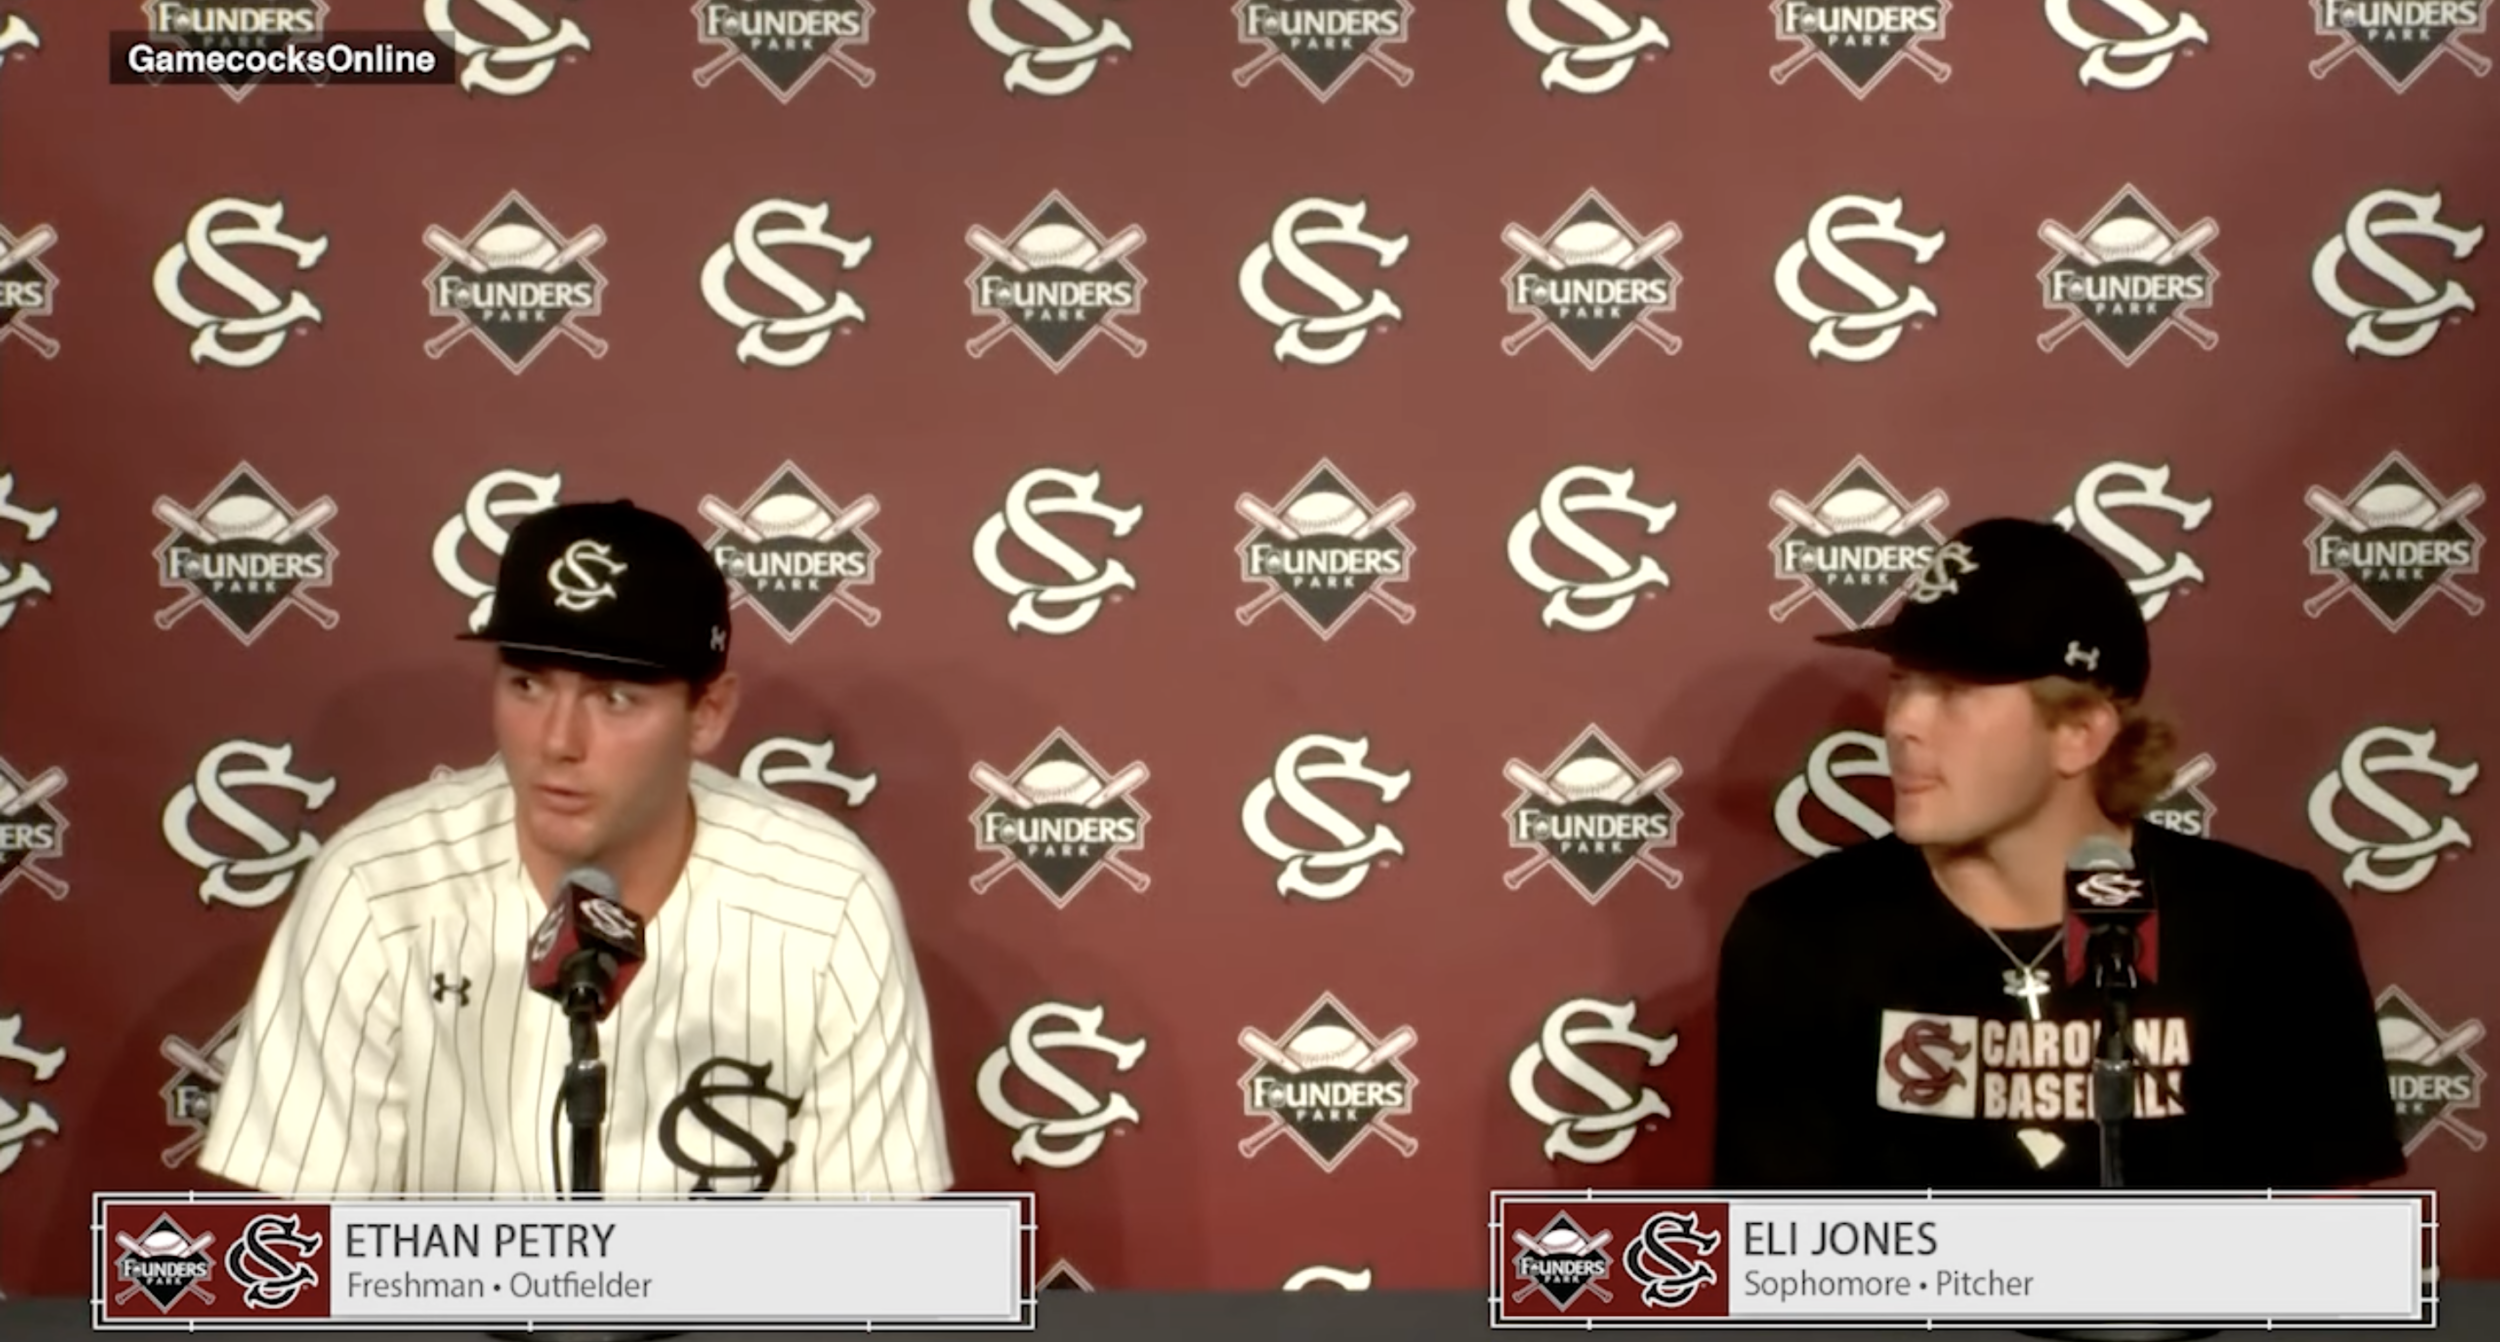 PostGame News Conference: Ethan Petry and Eli Jones - (Florida)